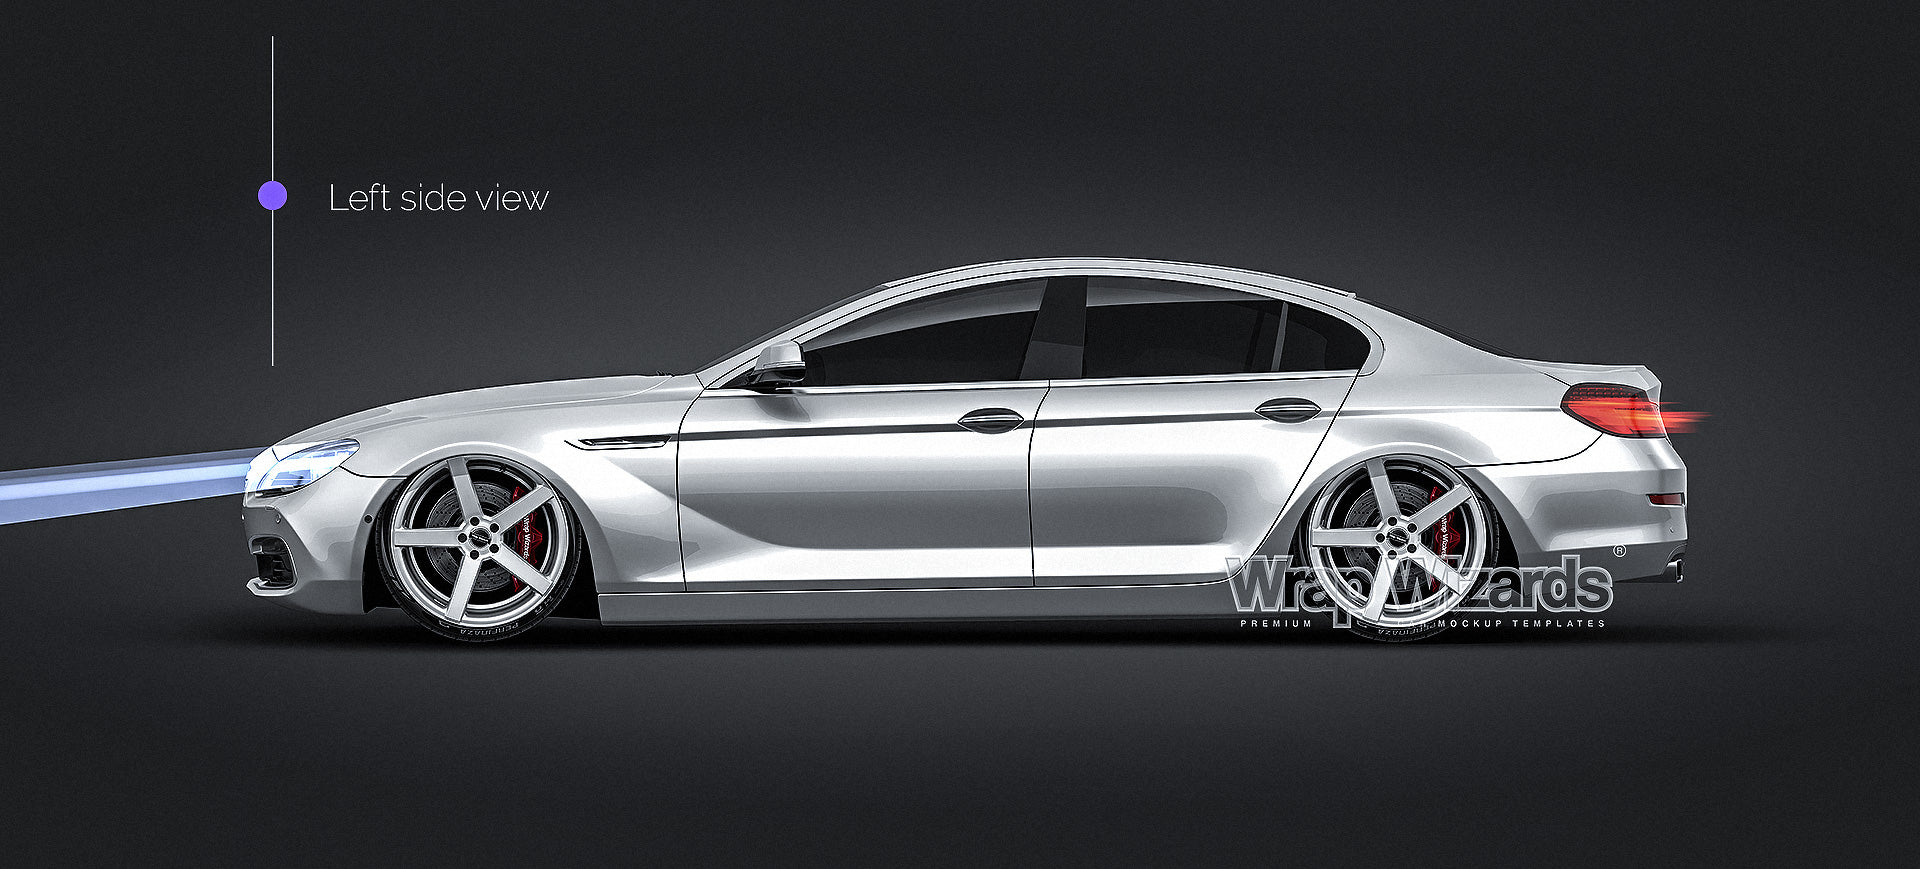 BMW 6-Series Gran Coupe 2015 glossy finish - all sides Car Mockup Template.psd